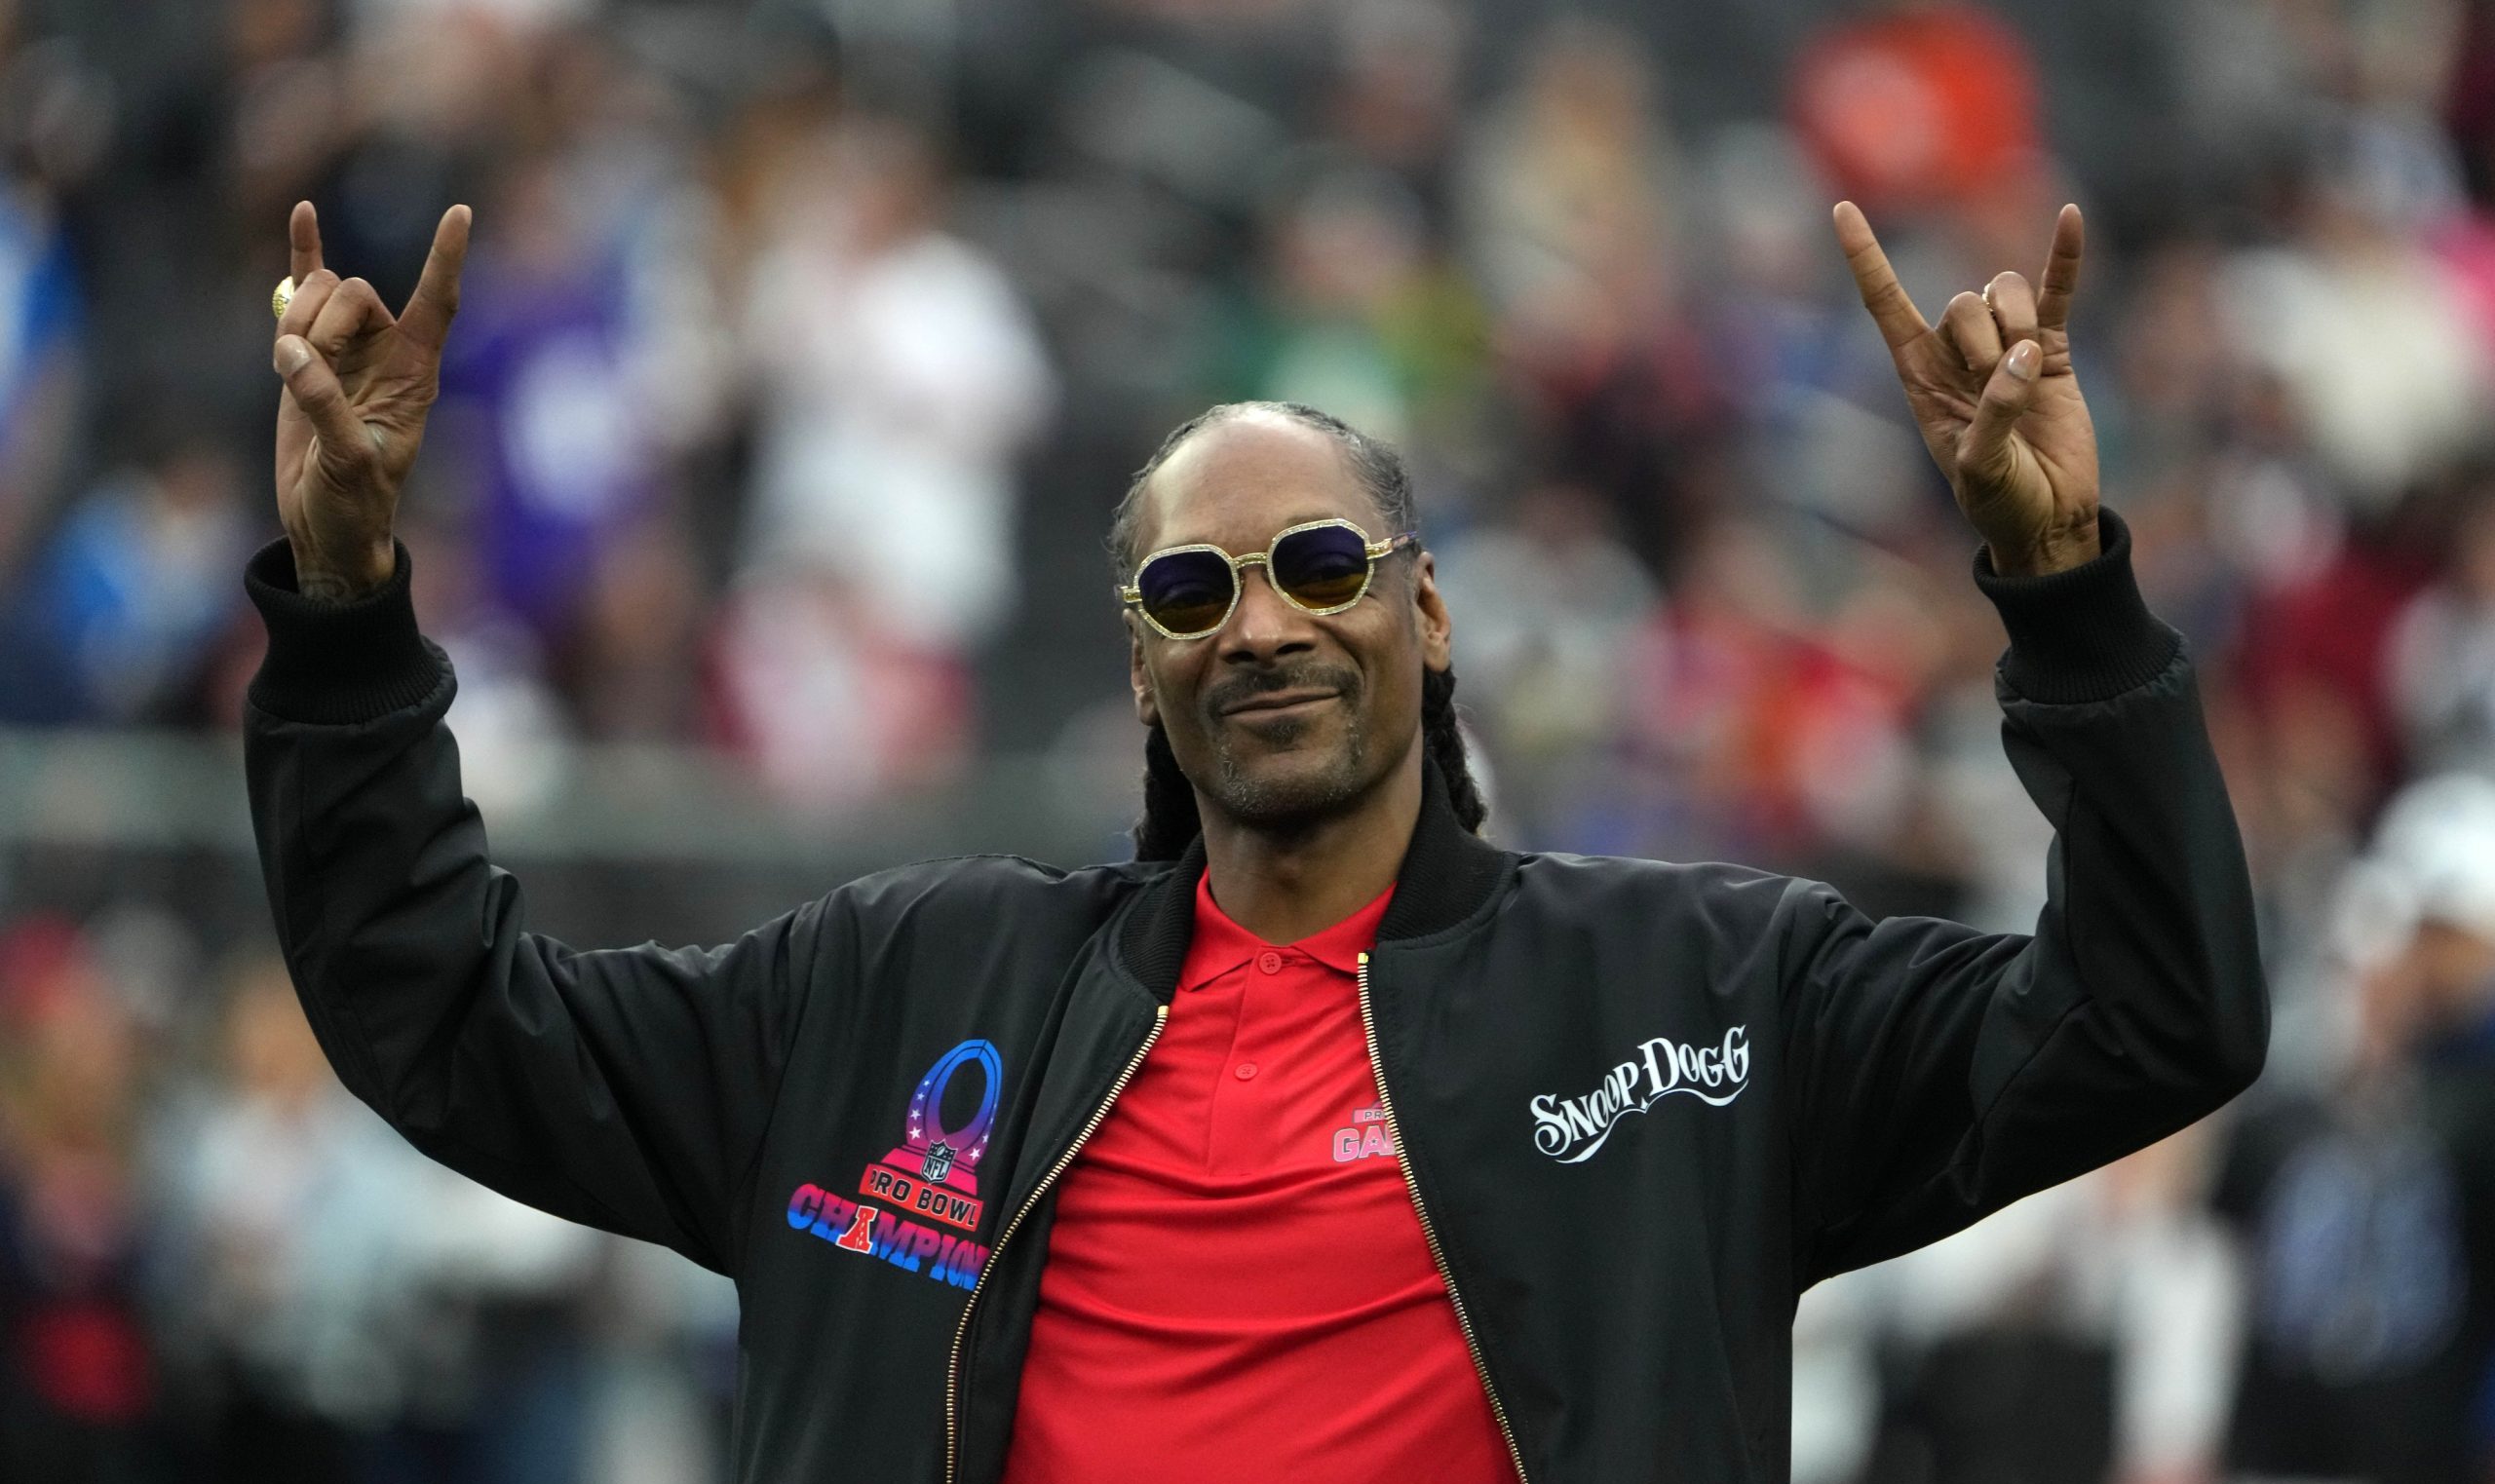 AFC captain and recording artist Snoop Dogg watches from the sidelines against the NFC during the Pro Bowl Games at Allegiant Stadium.